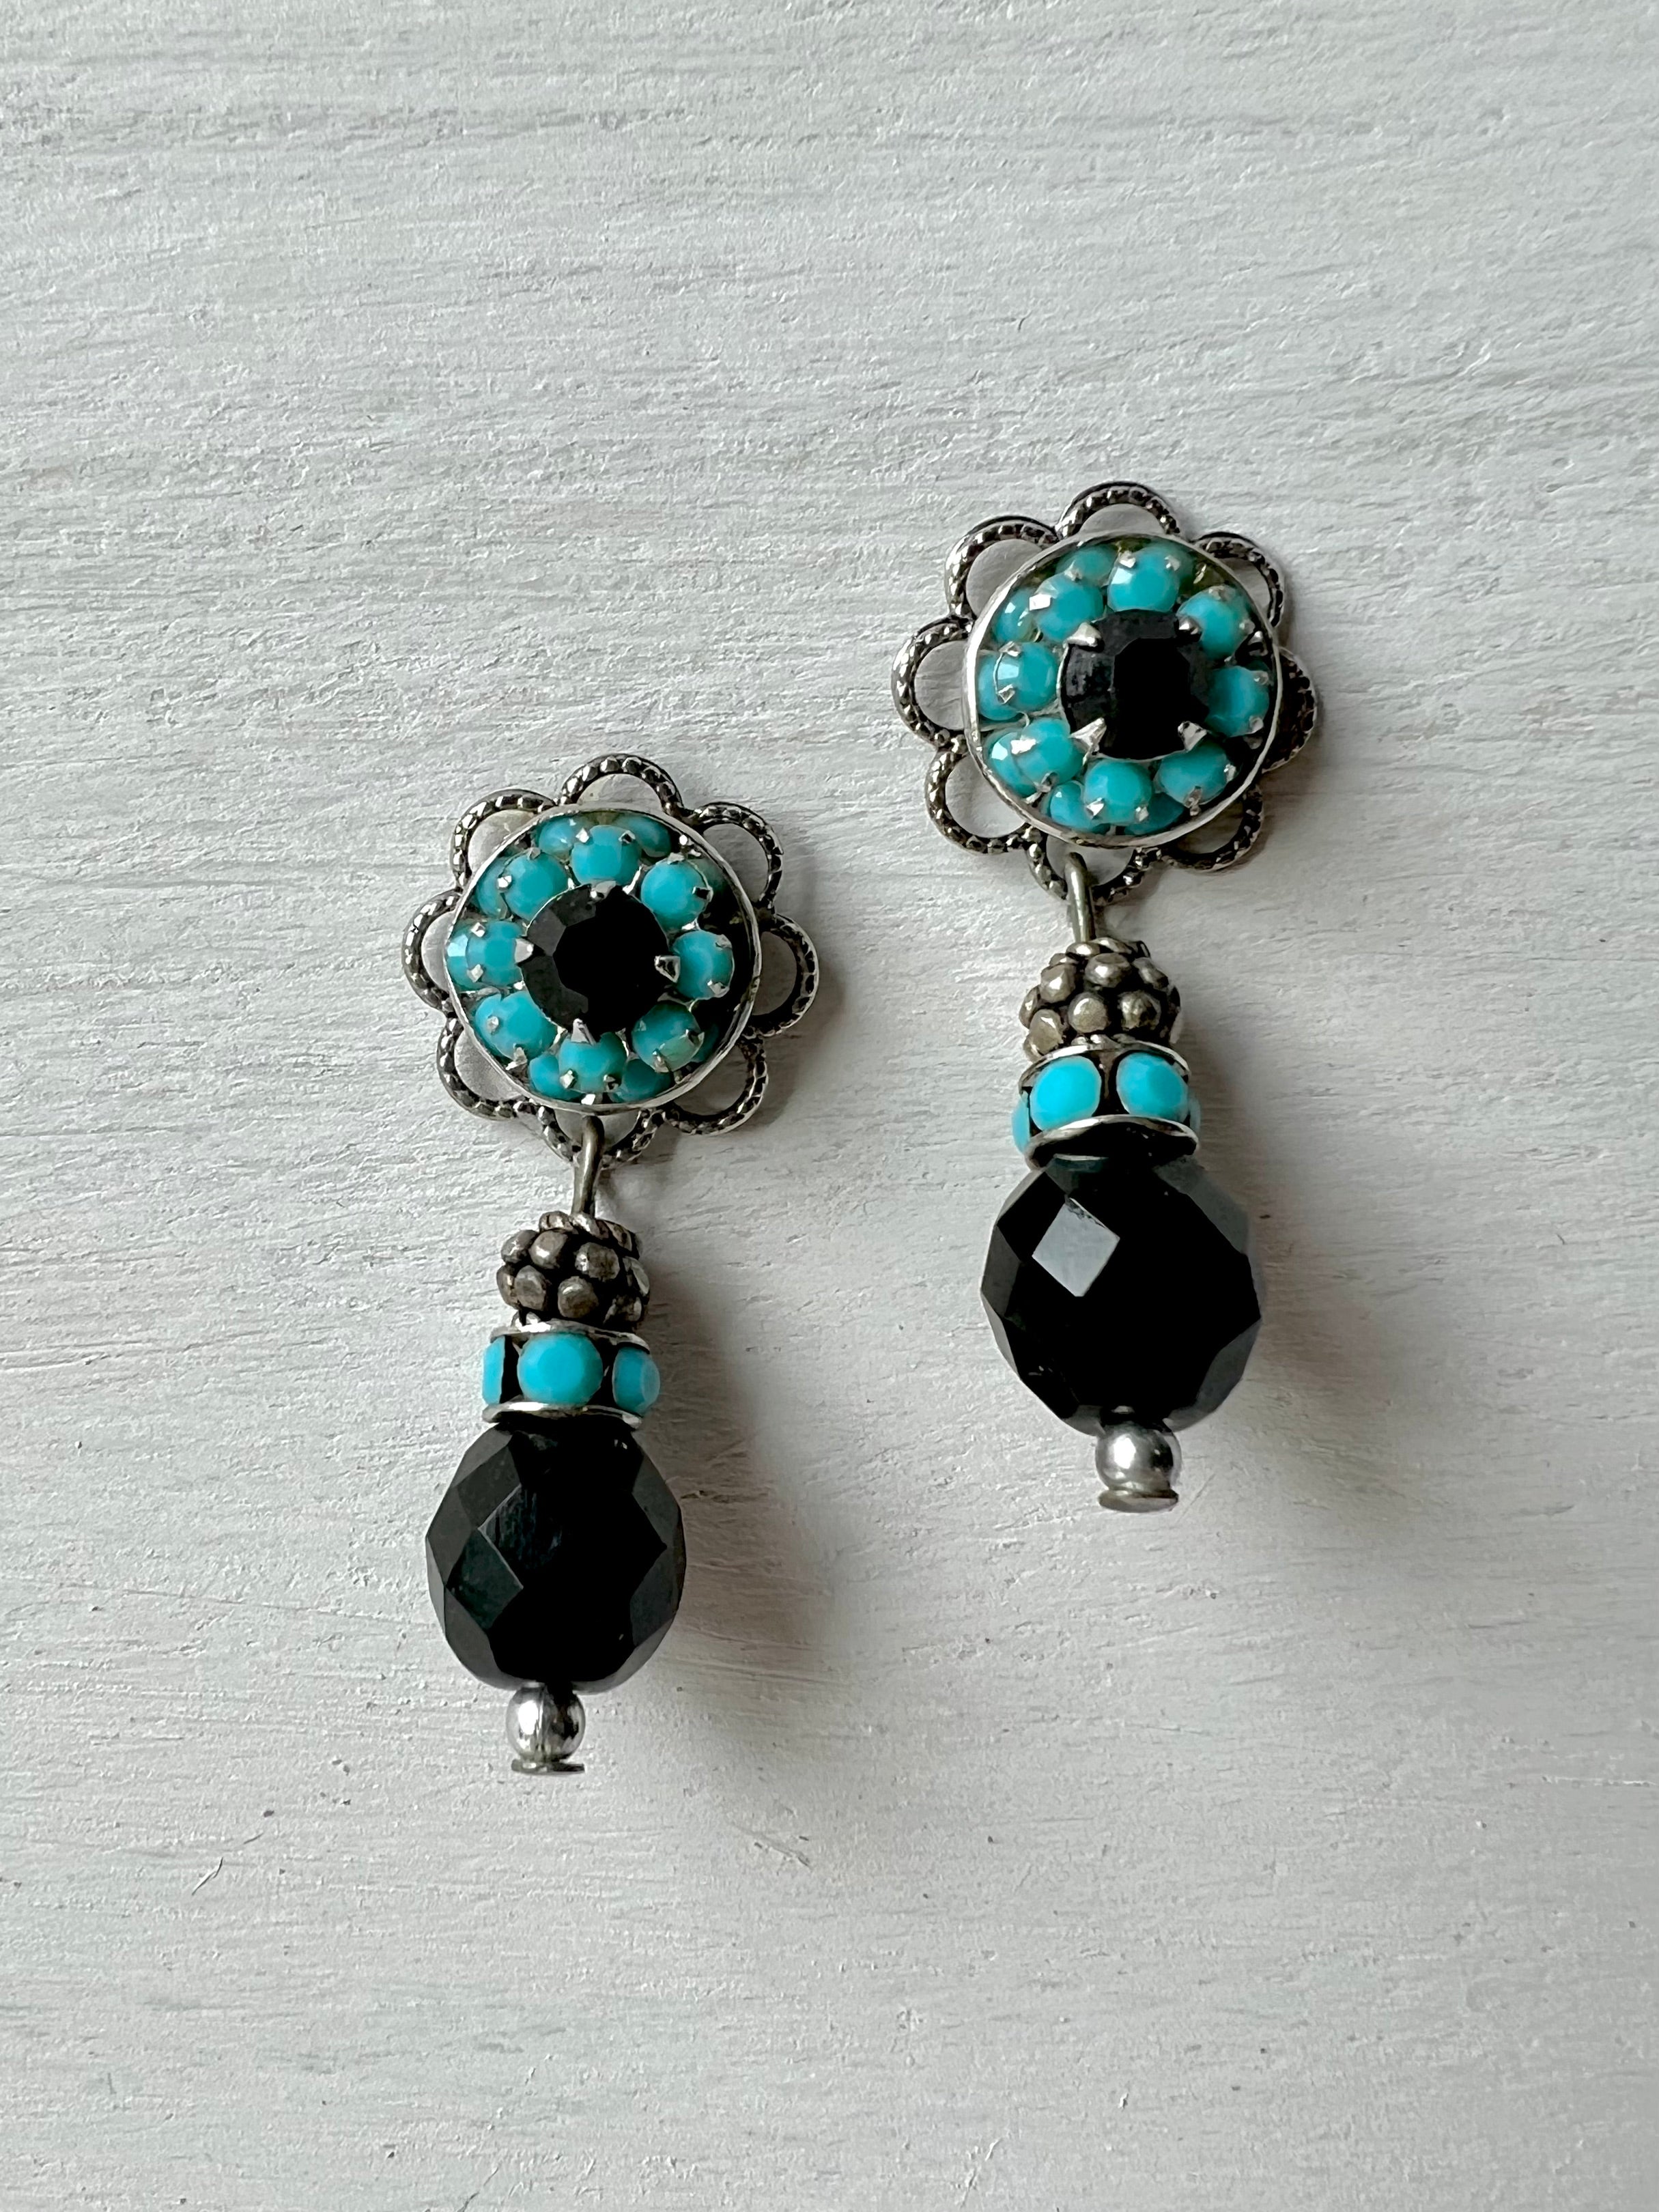 RGS-E071: Handcrafted Crystal Earrings